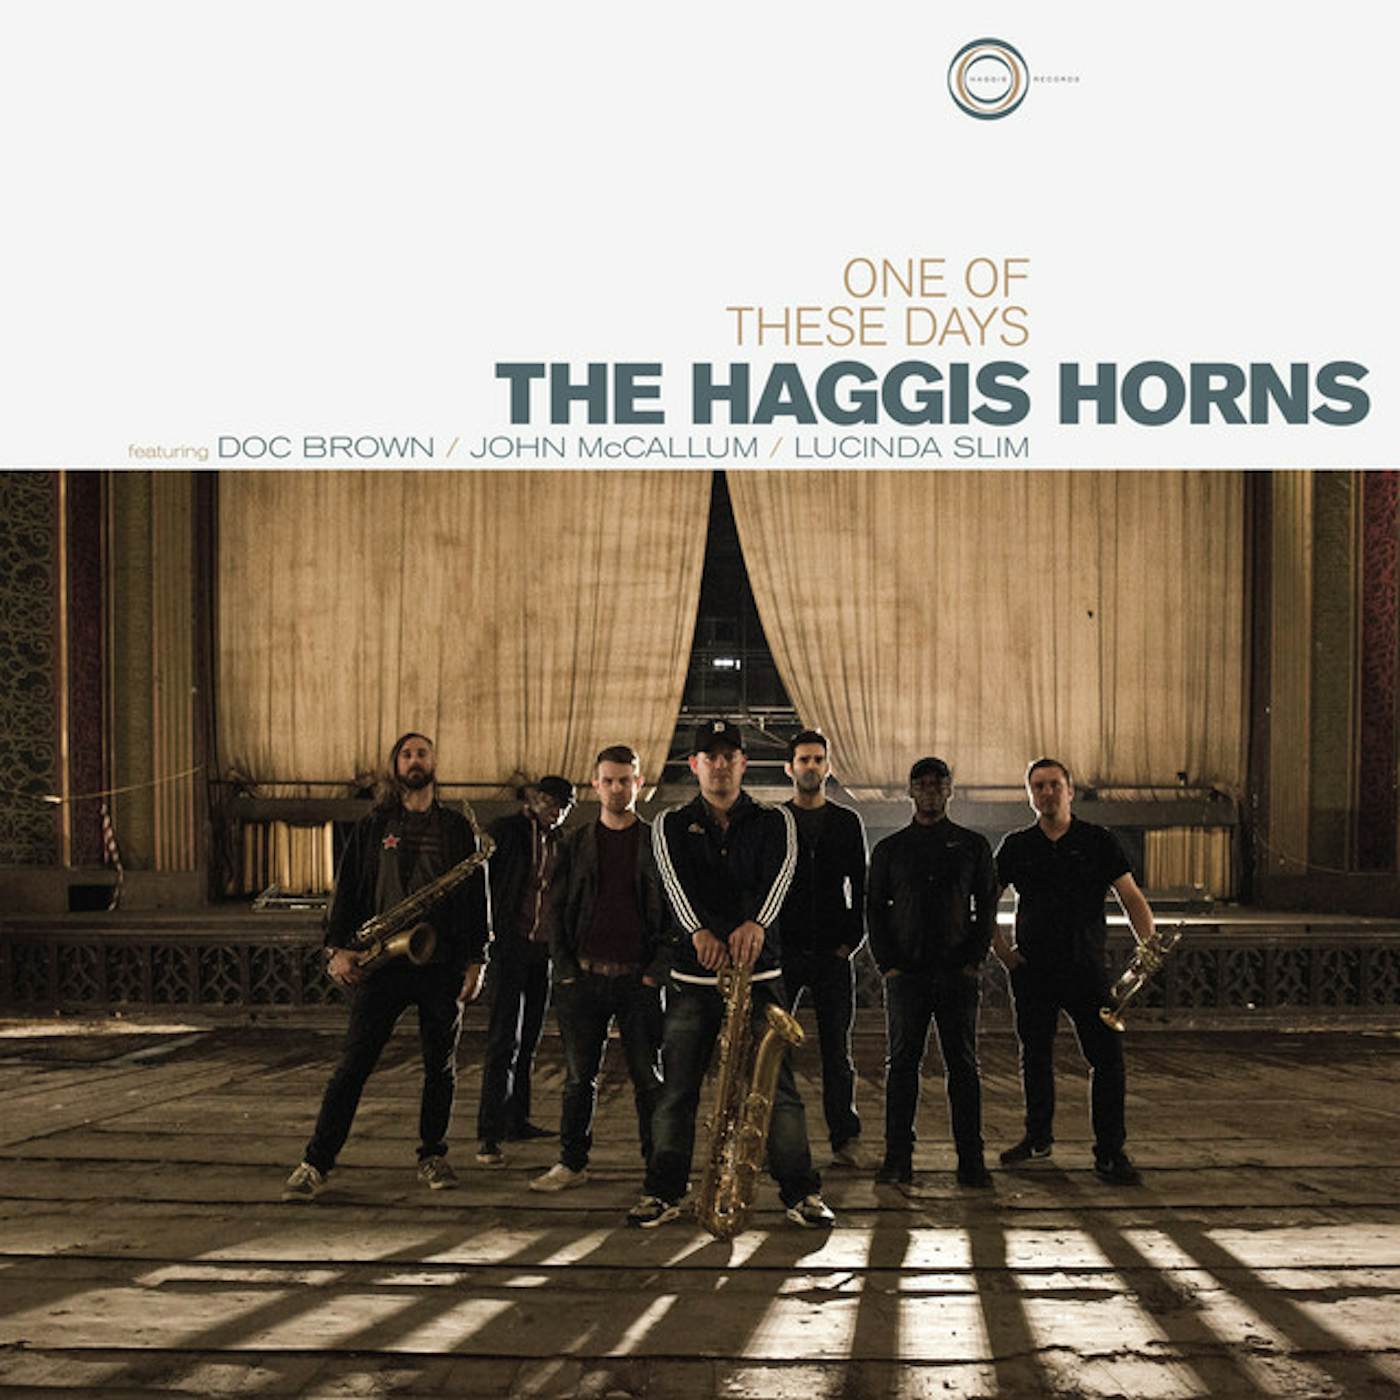 The Haggis Horns One of These Days Vinyl Record